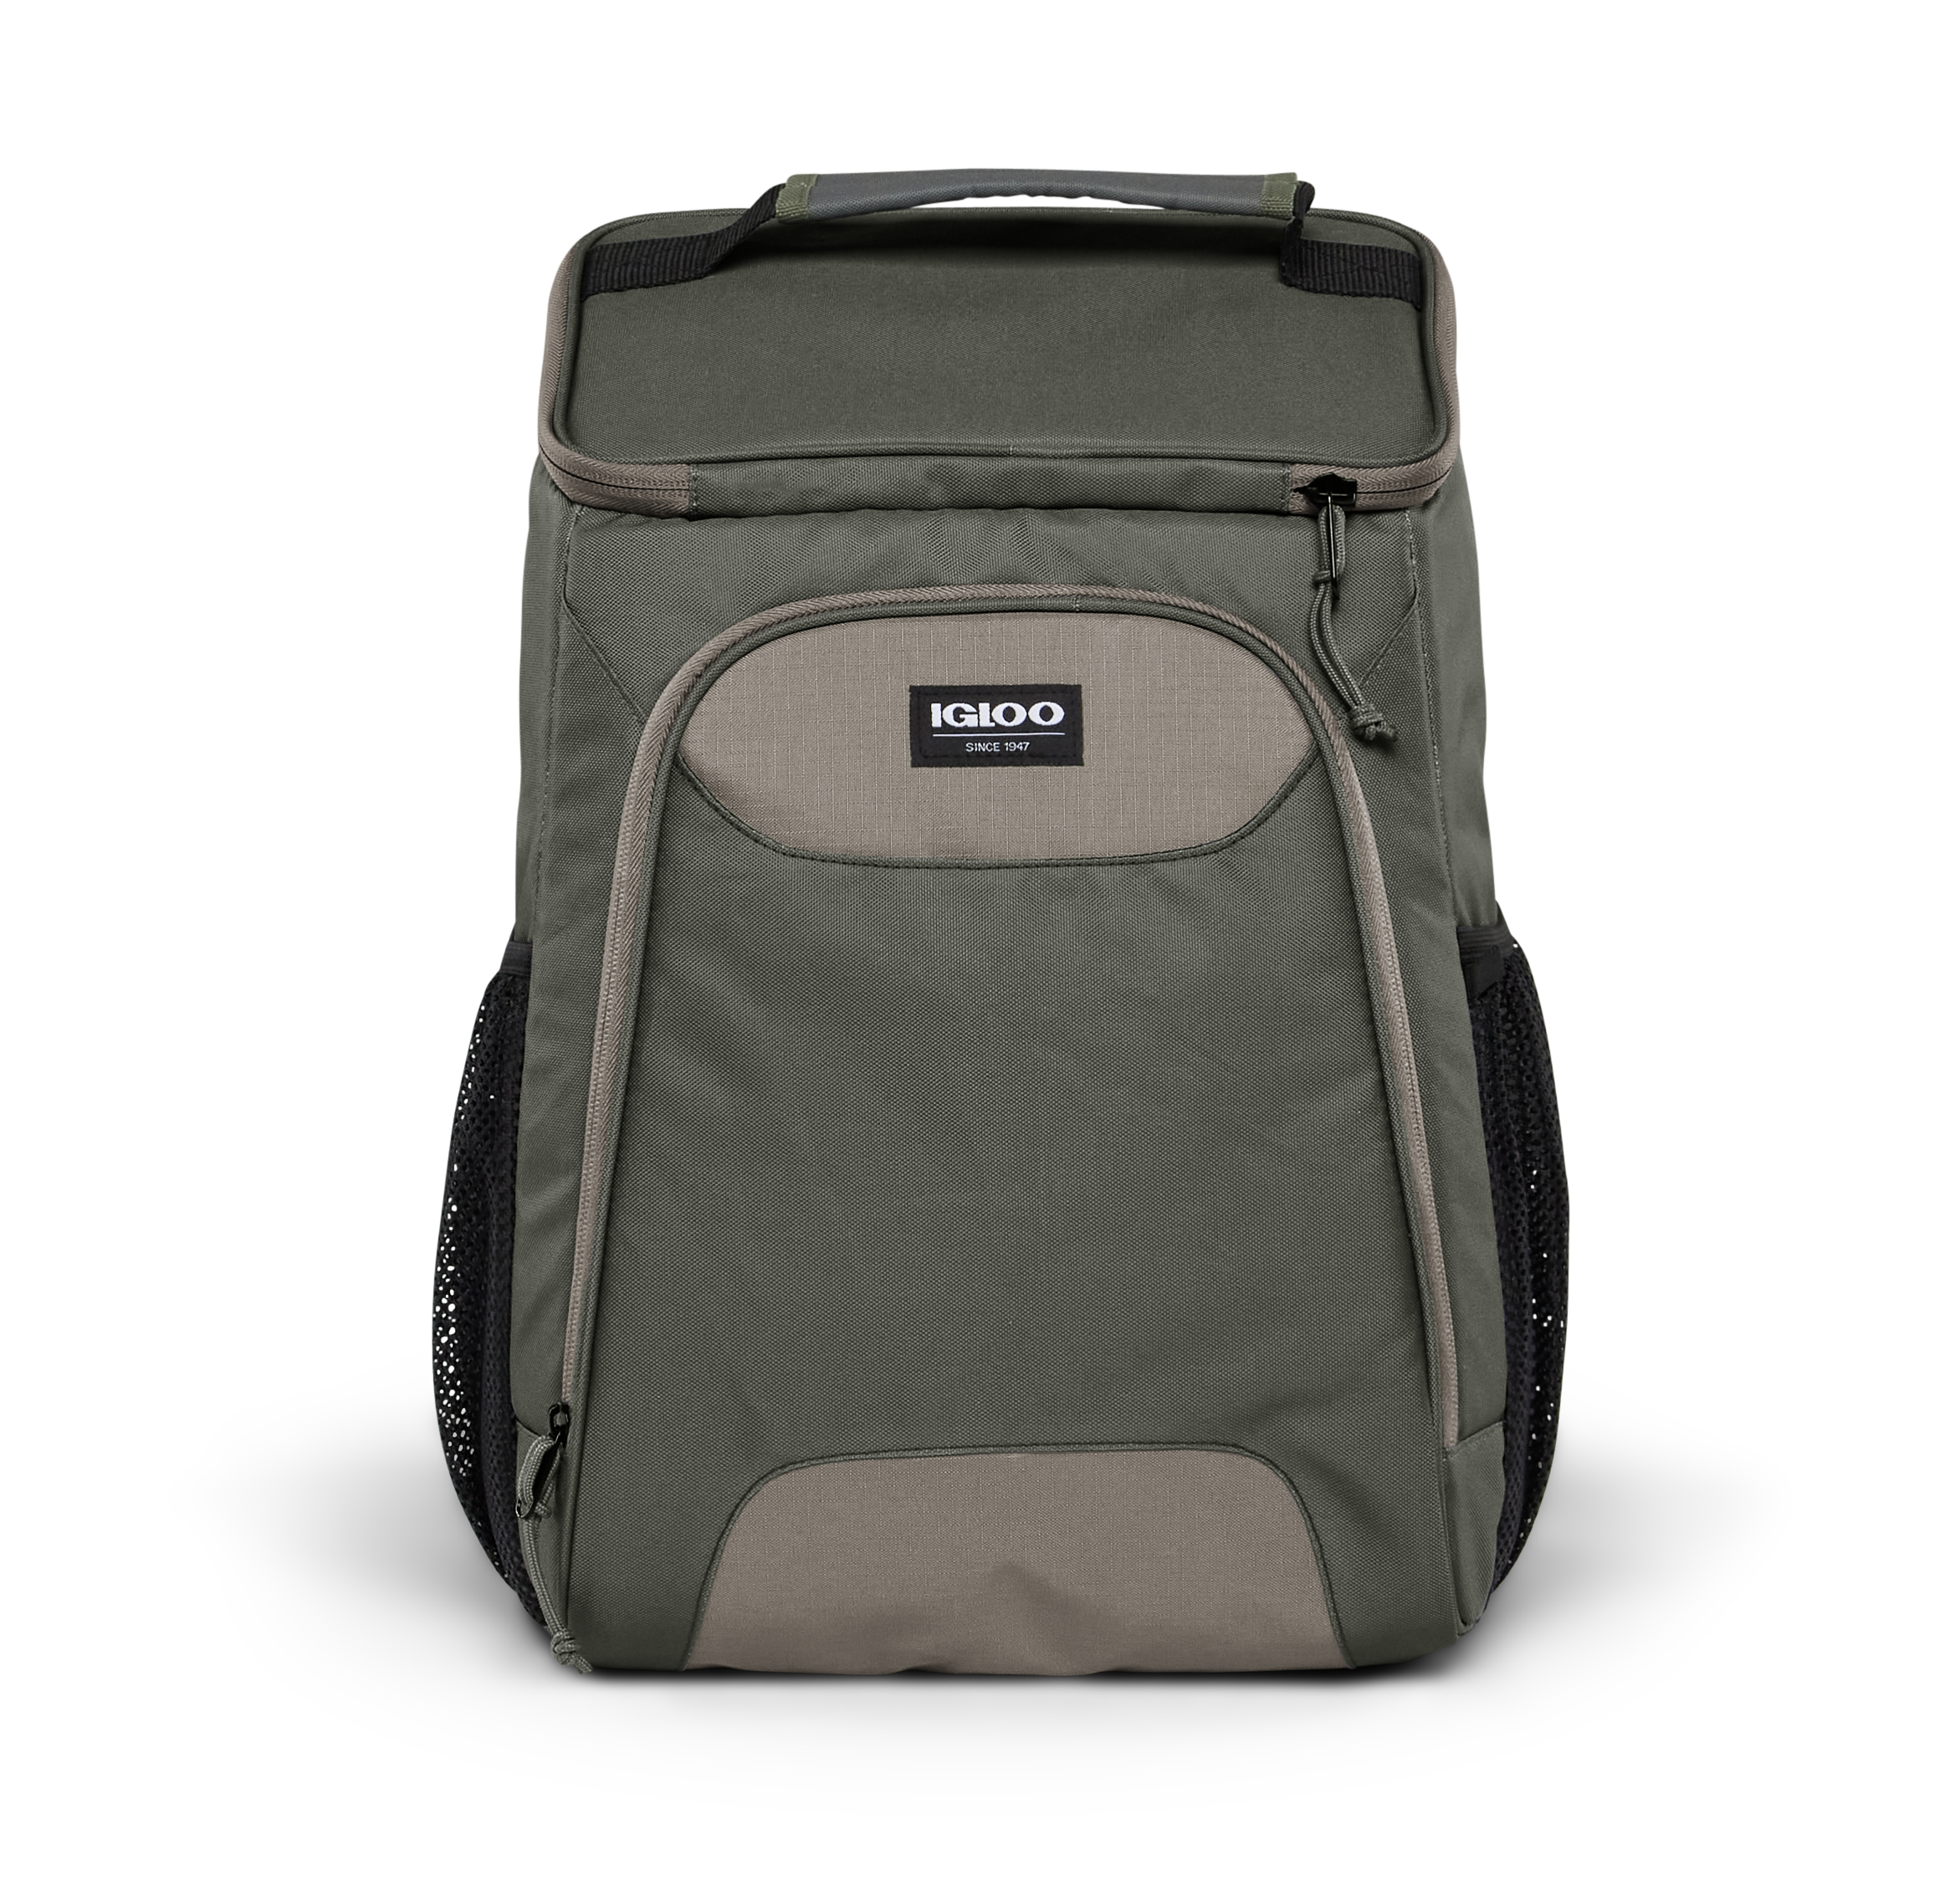 Igloo 24 cans Topgrip Soft Sided Cooler Backpack, Green - image 1 of 9